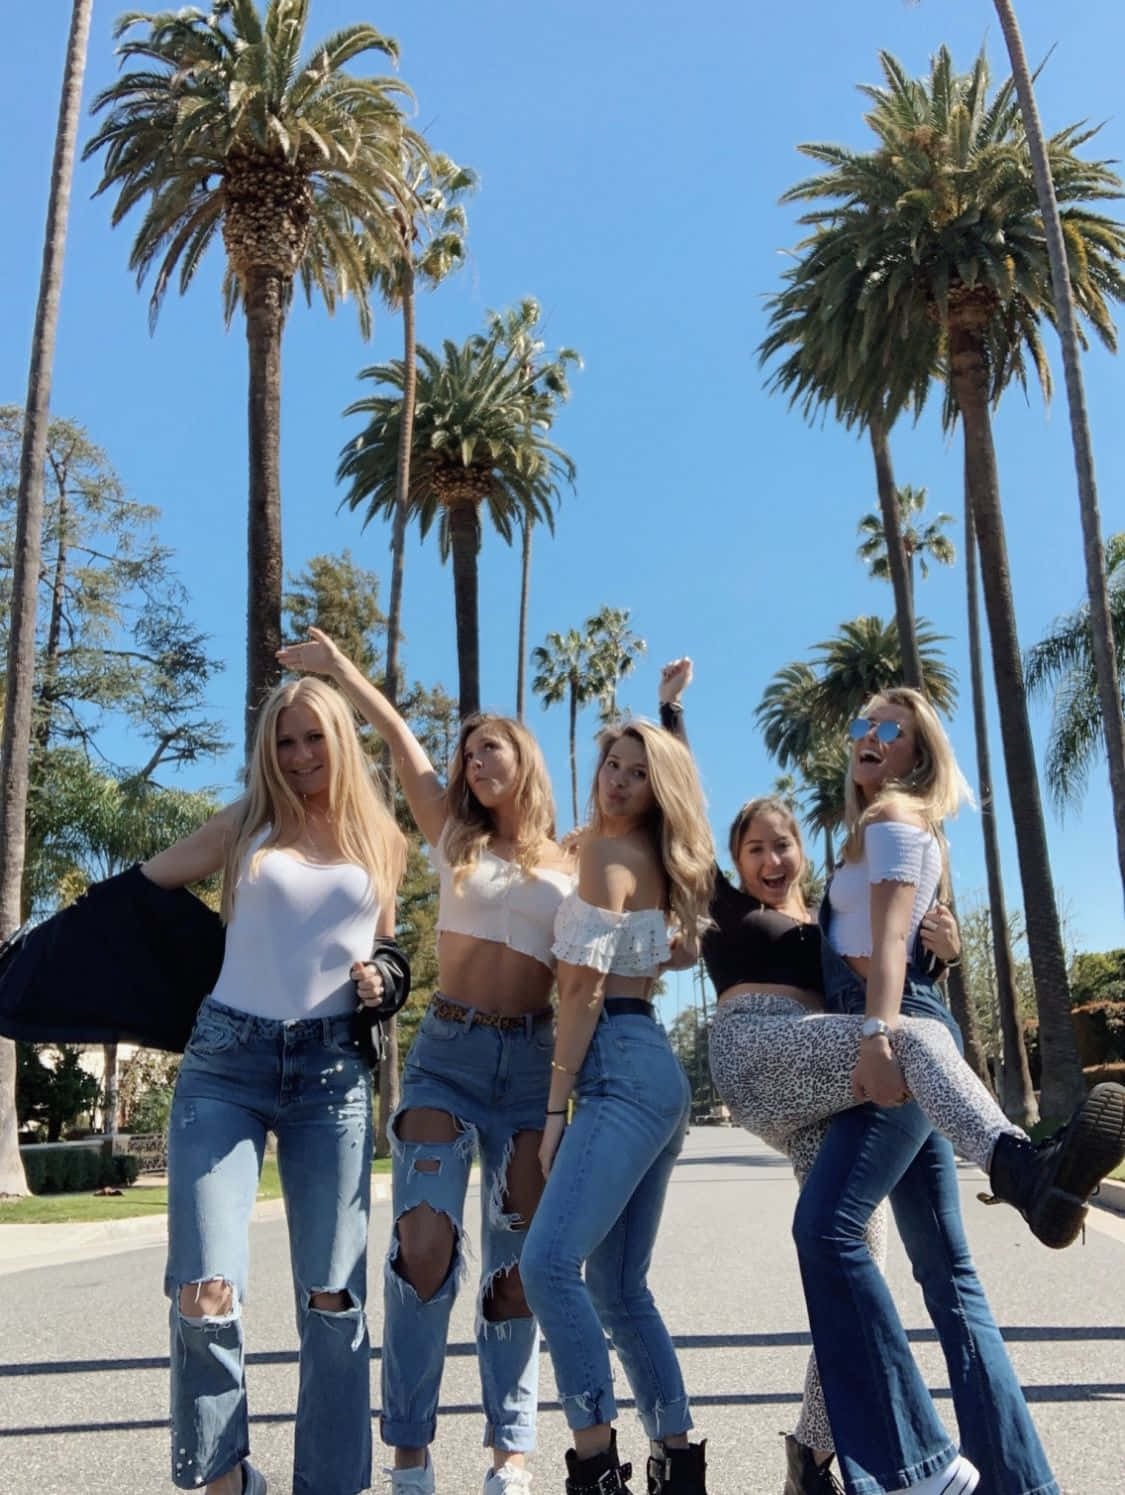 A Group Of Girls In Jeans And T-shirts Posing For A Photo Background